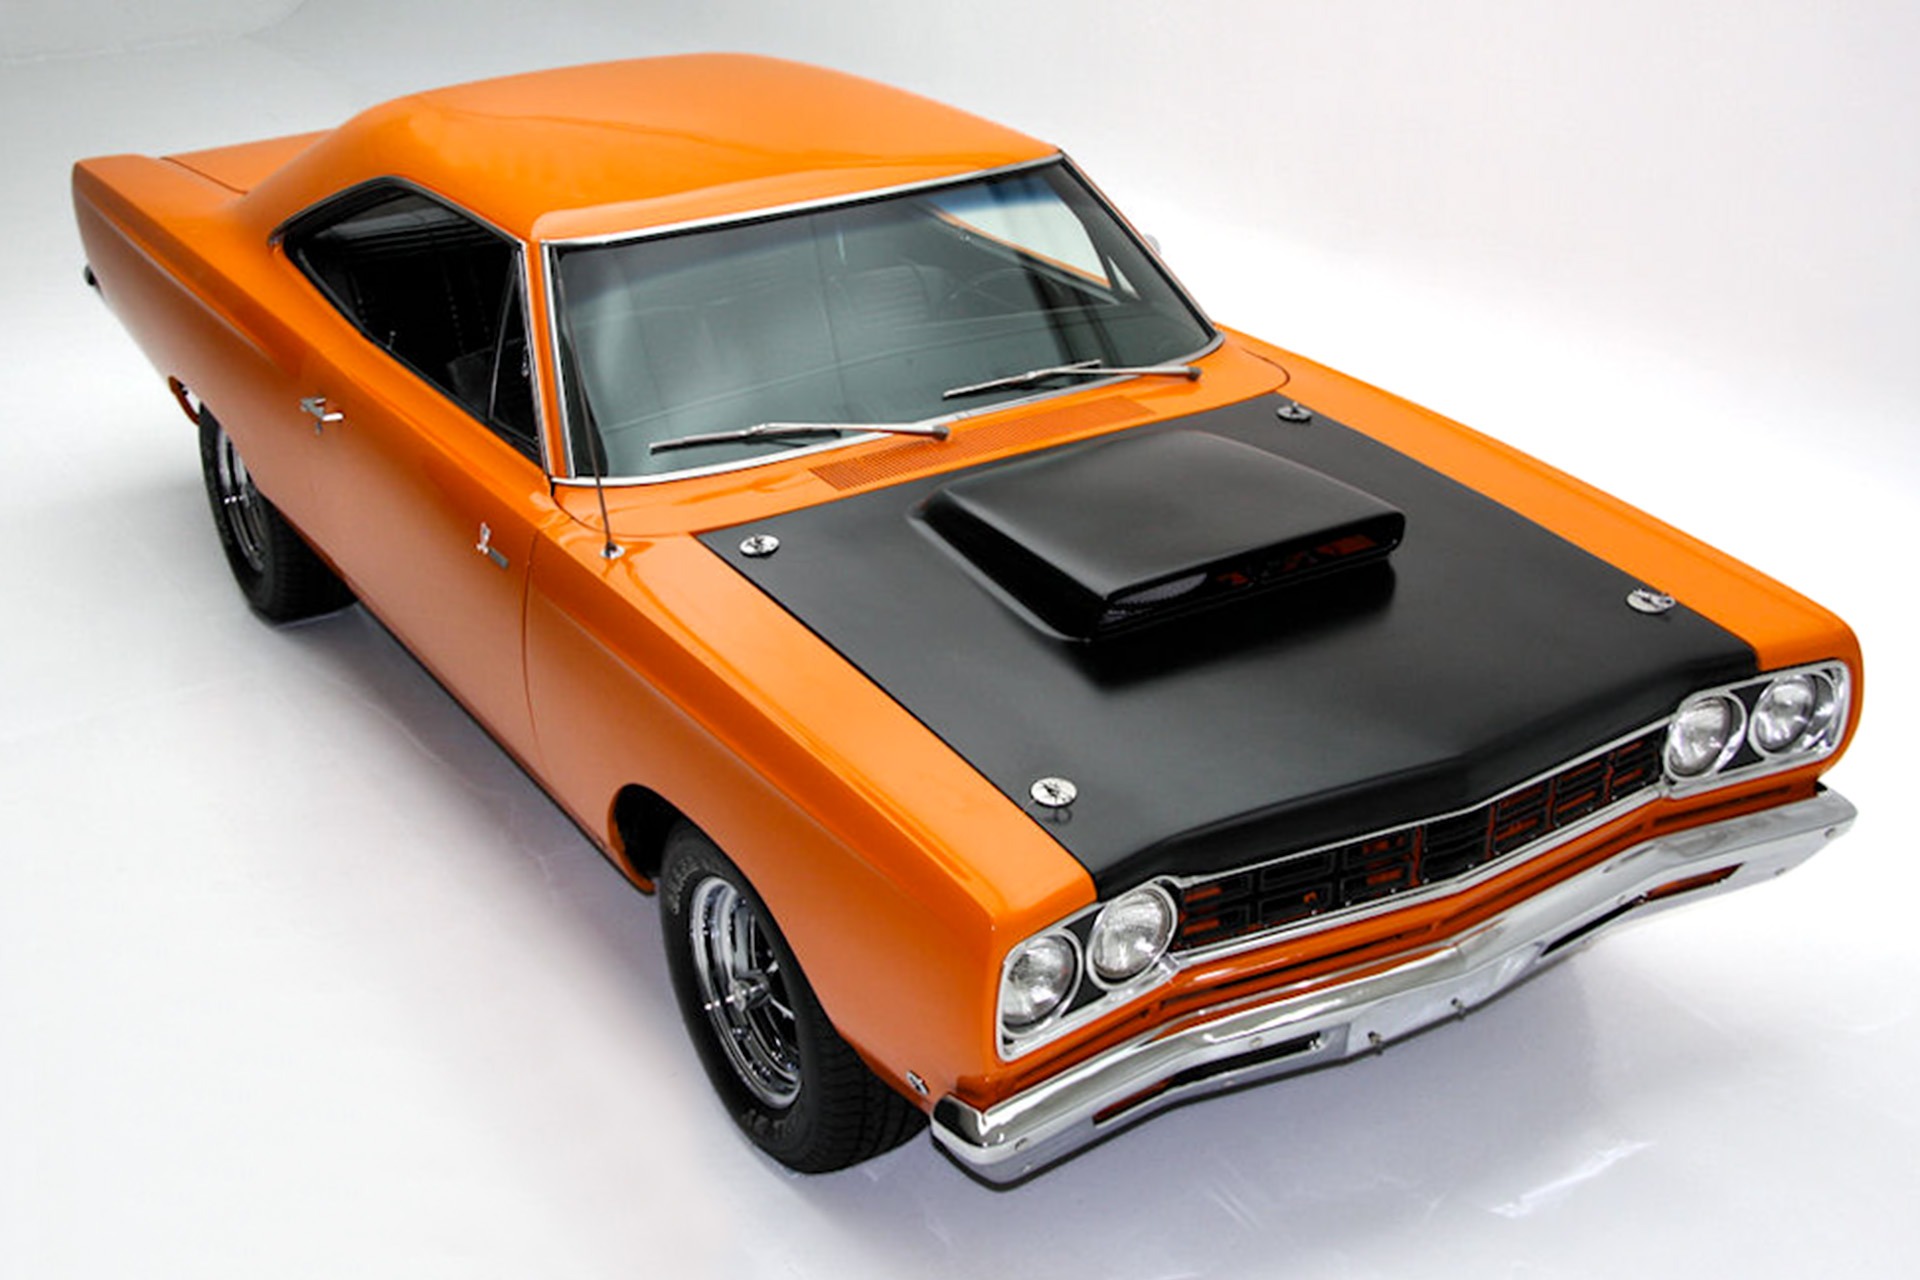 For Sale Used 1968 Plymouth Roadrunner 440 Big block | American Dream Machines Des Moines IA 50309